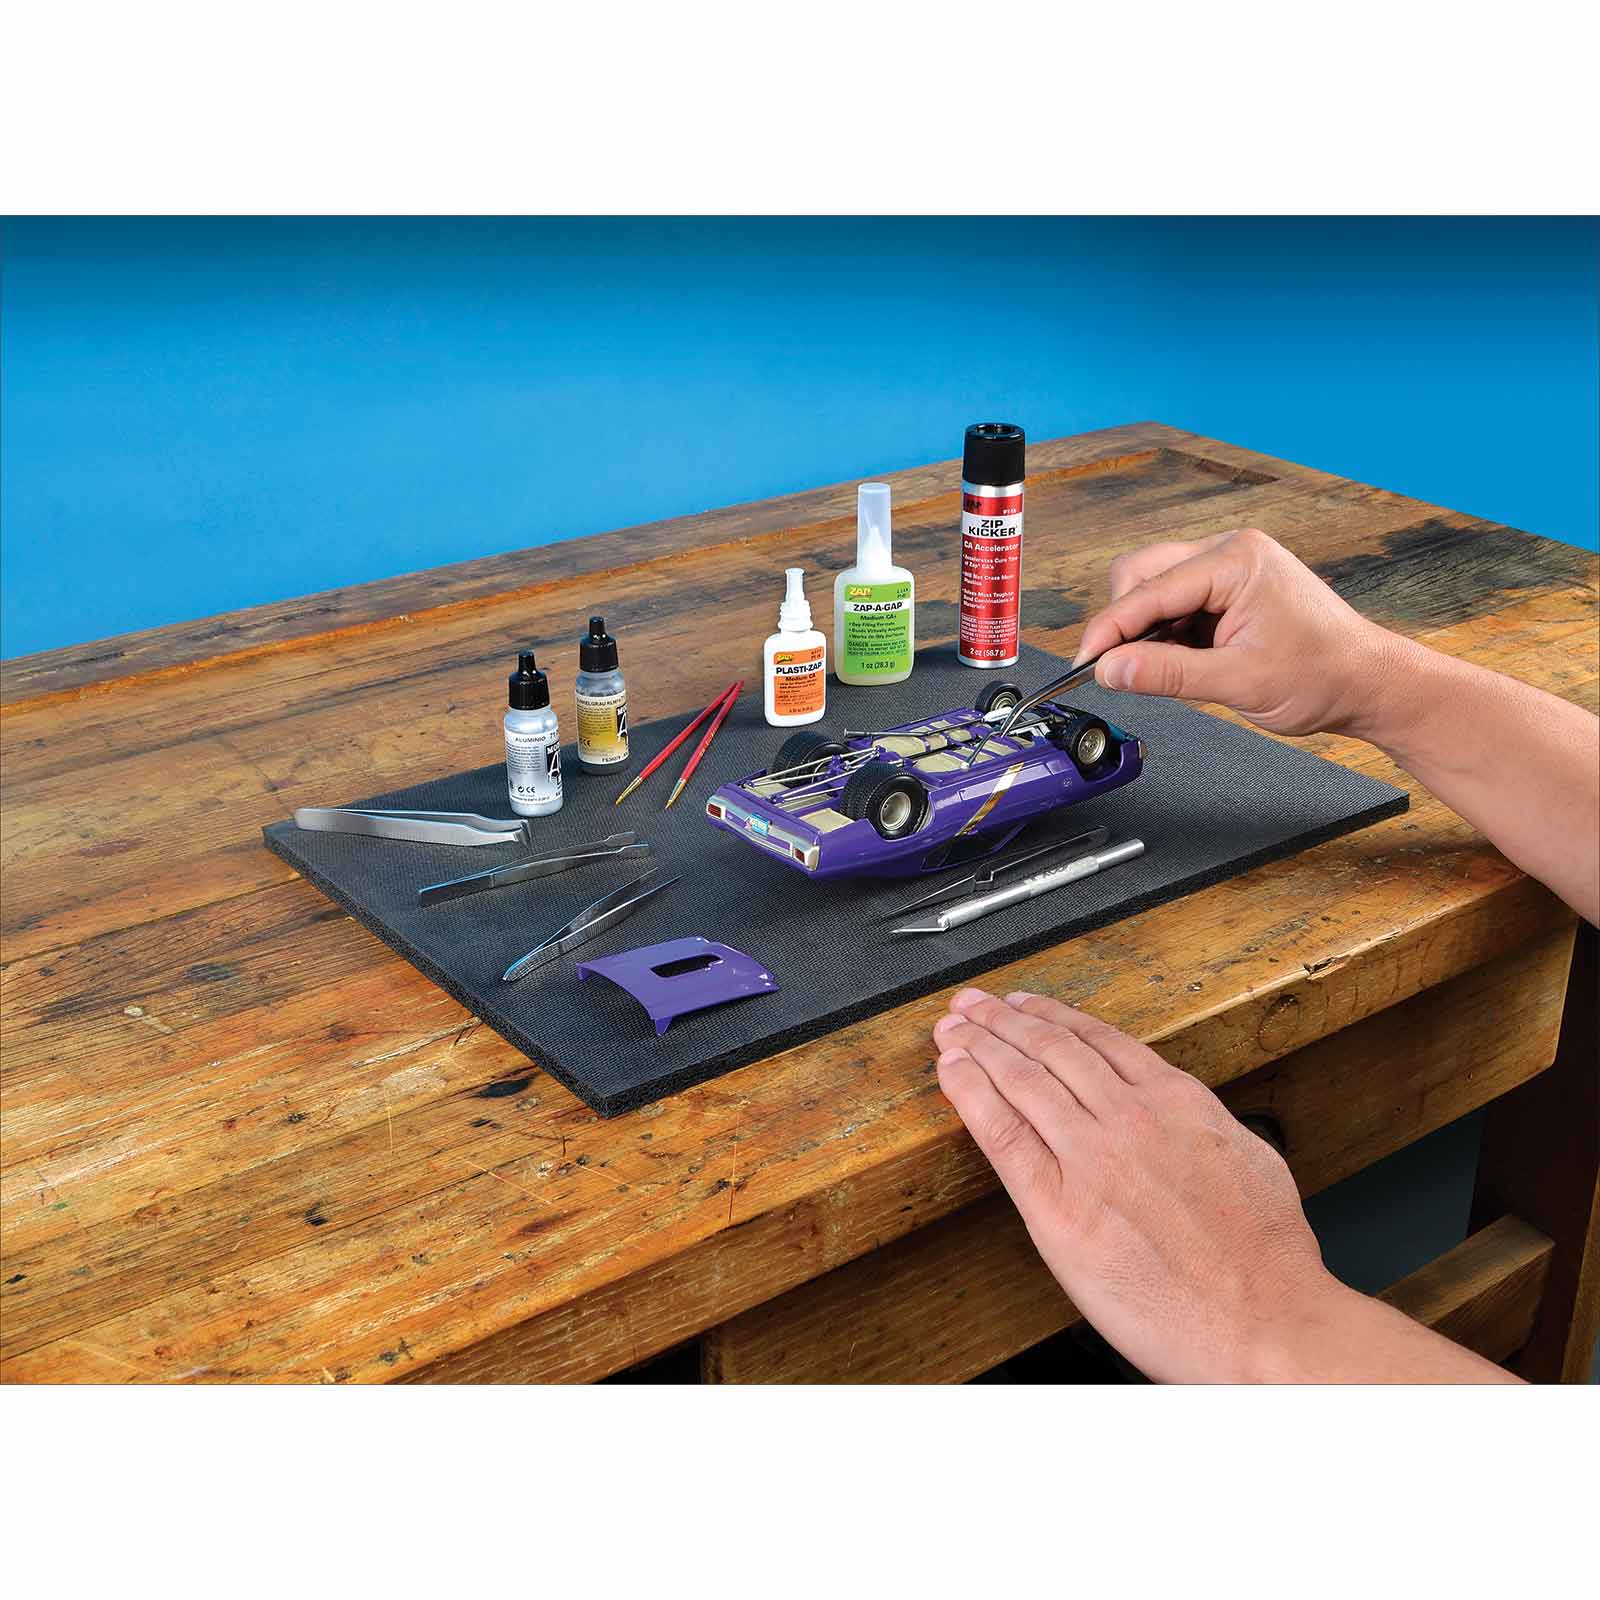 Soft Touch Model Mat Protective Pad - Micro - Mark Painting Accessories